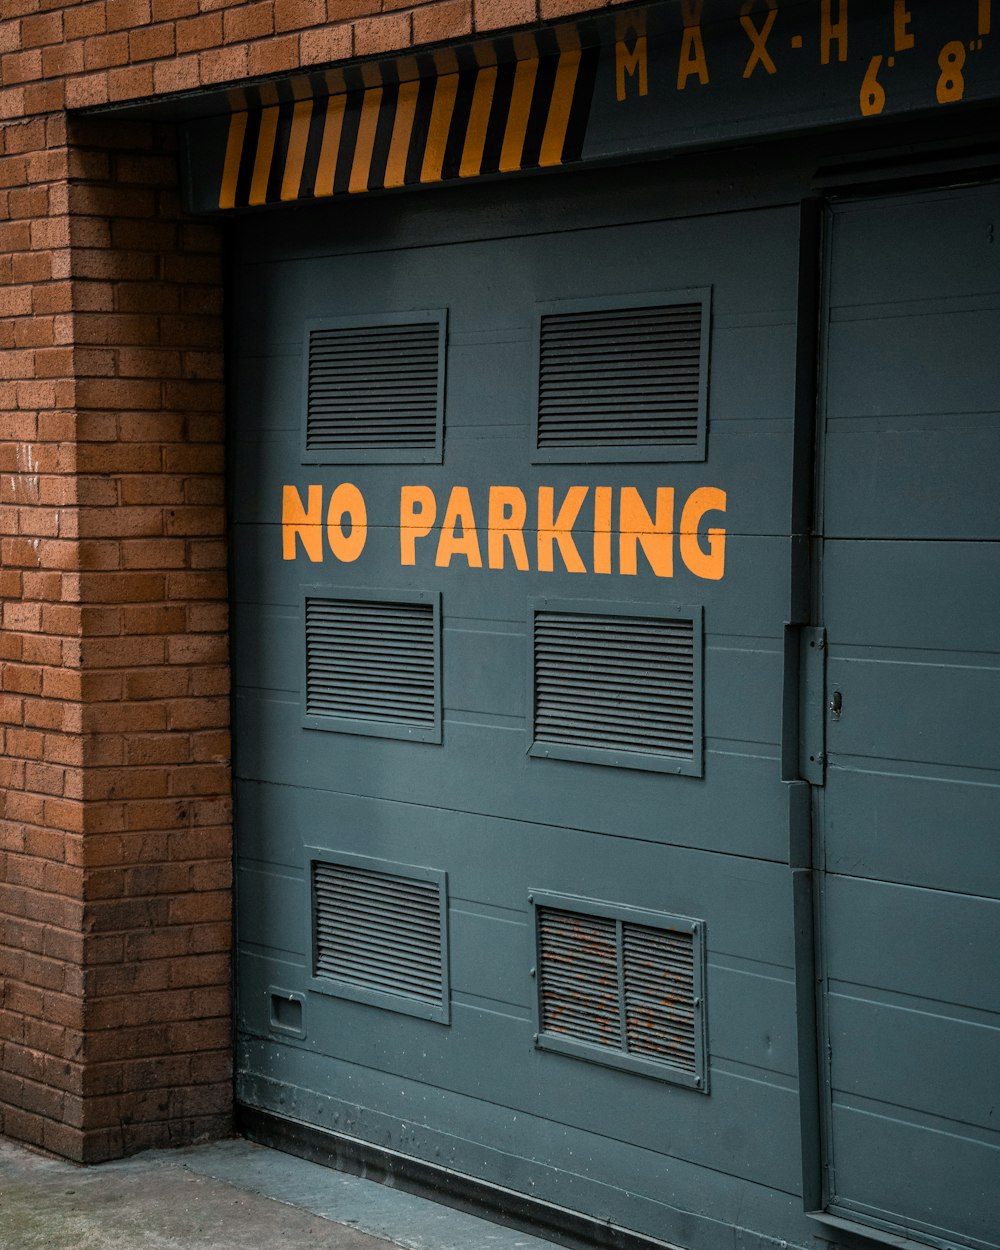 there is a no parking sign on the garage door